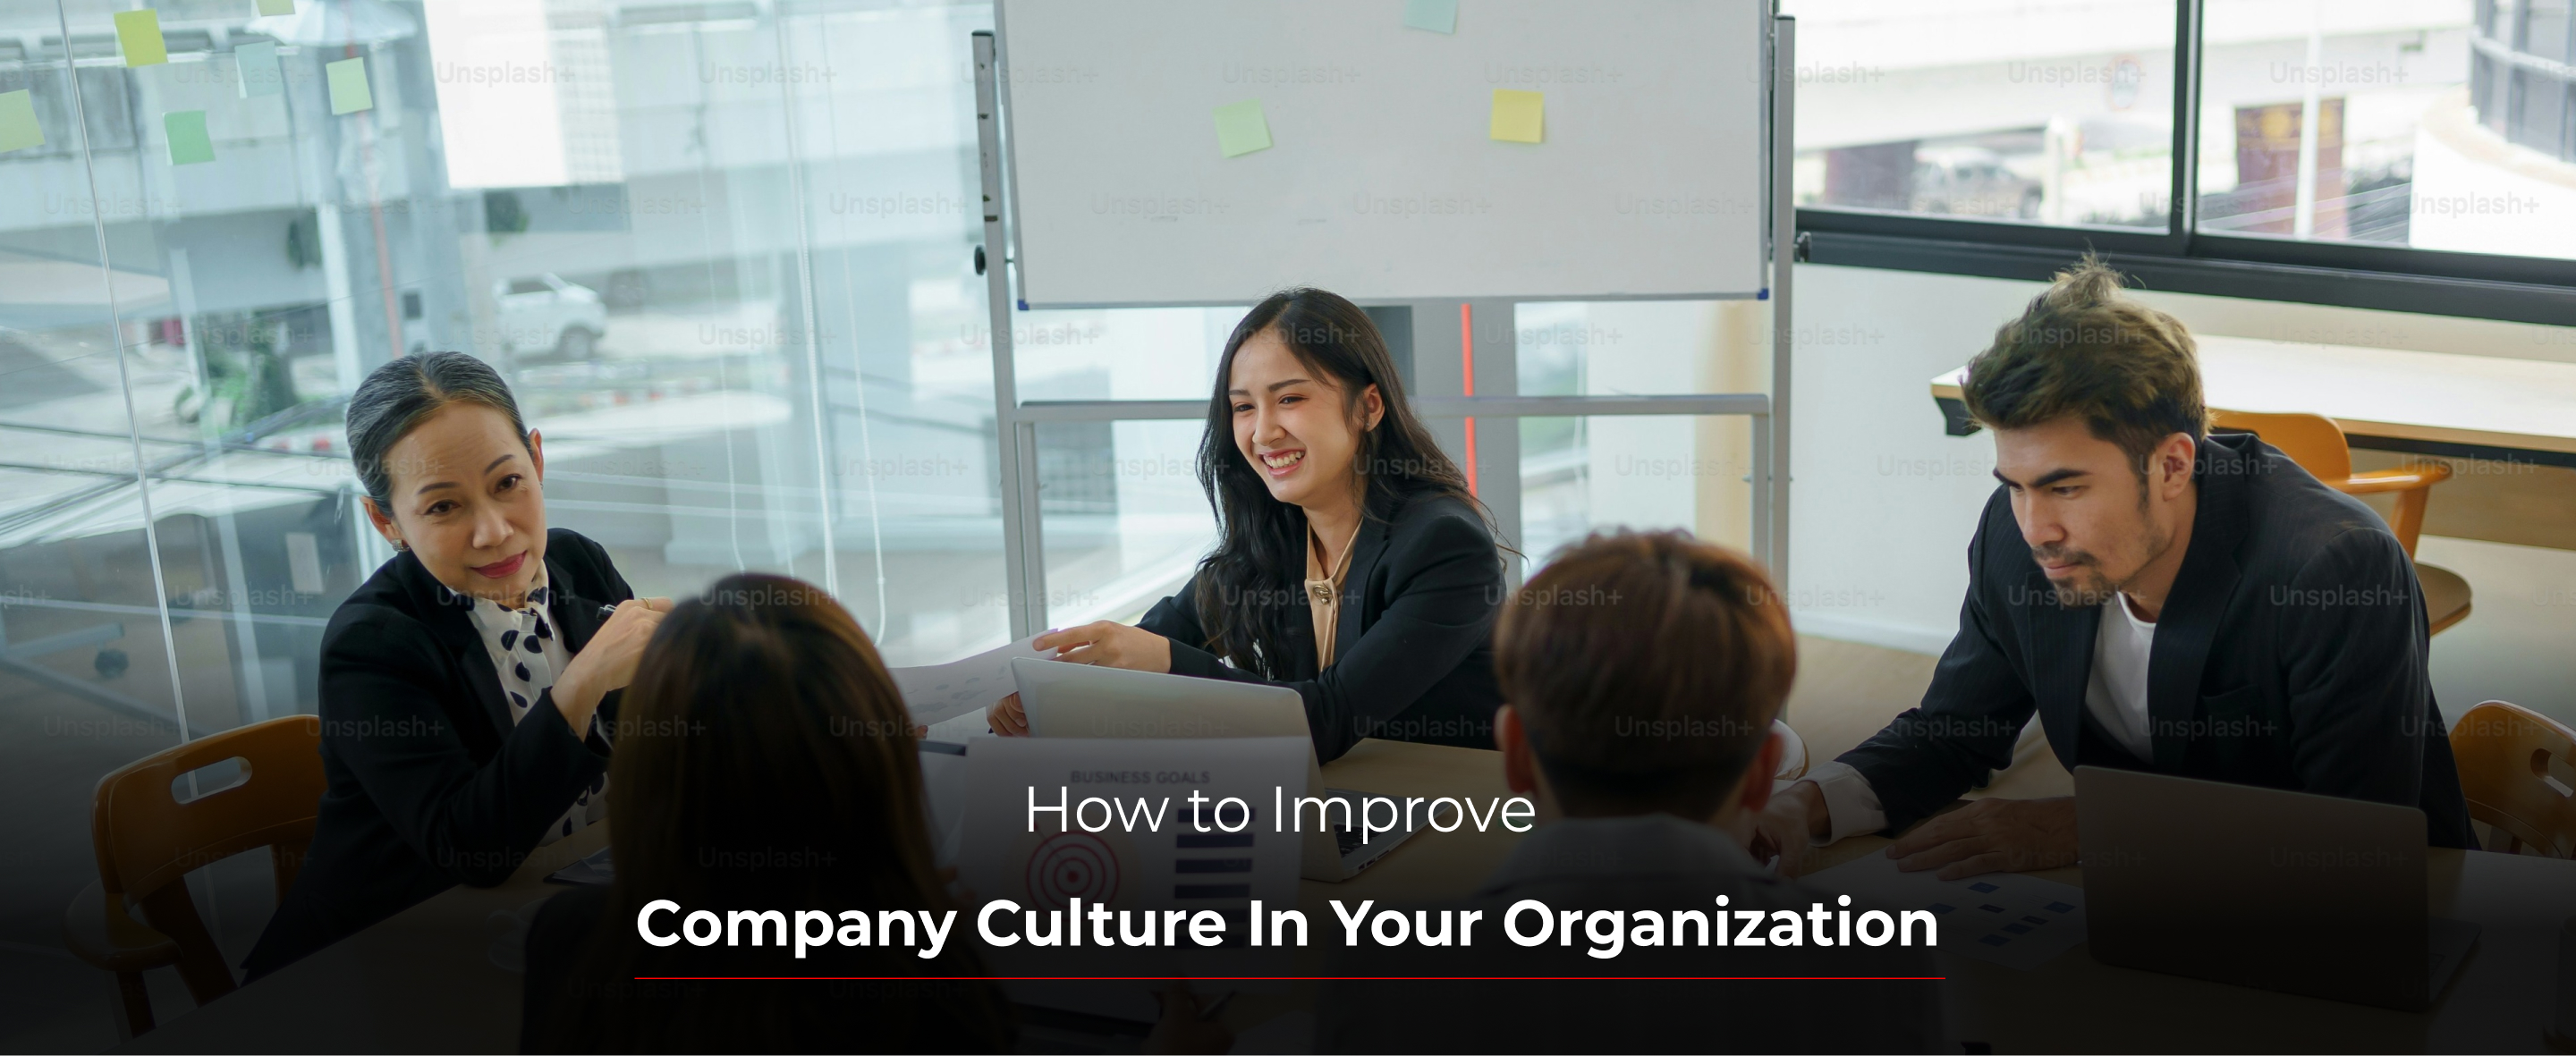 How to Improve Company Culture In Your Organization